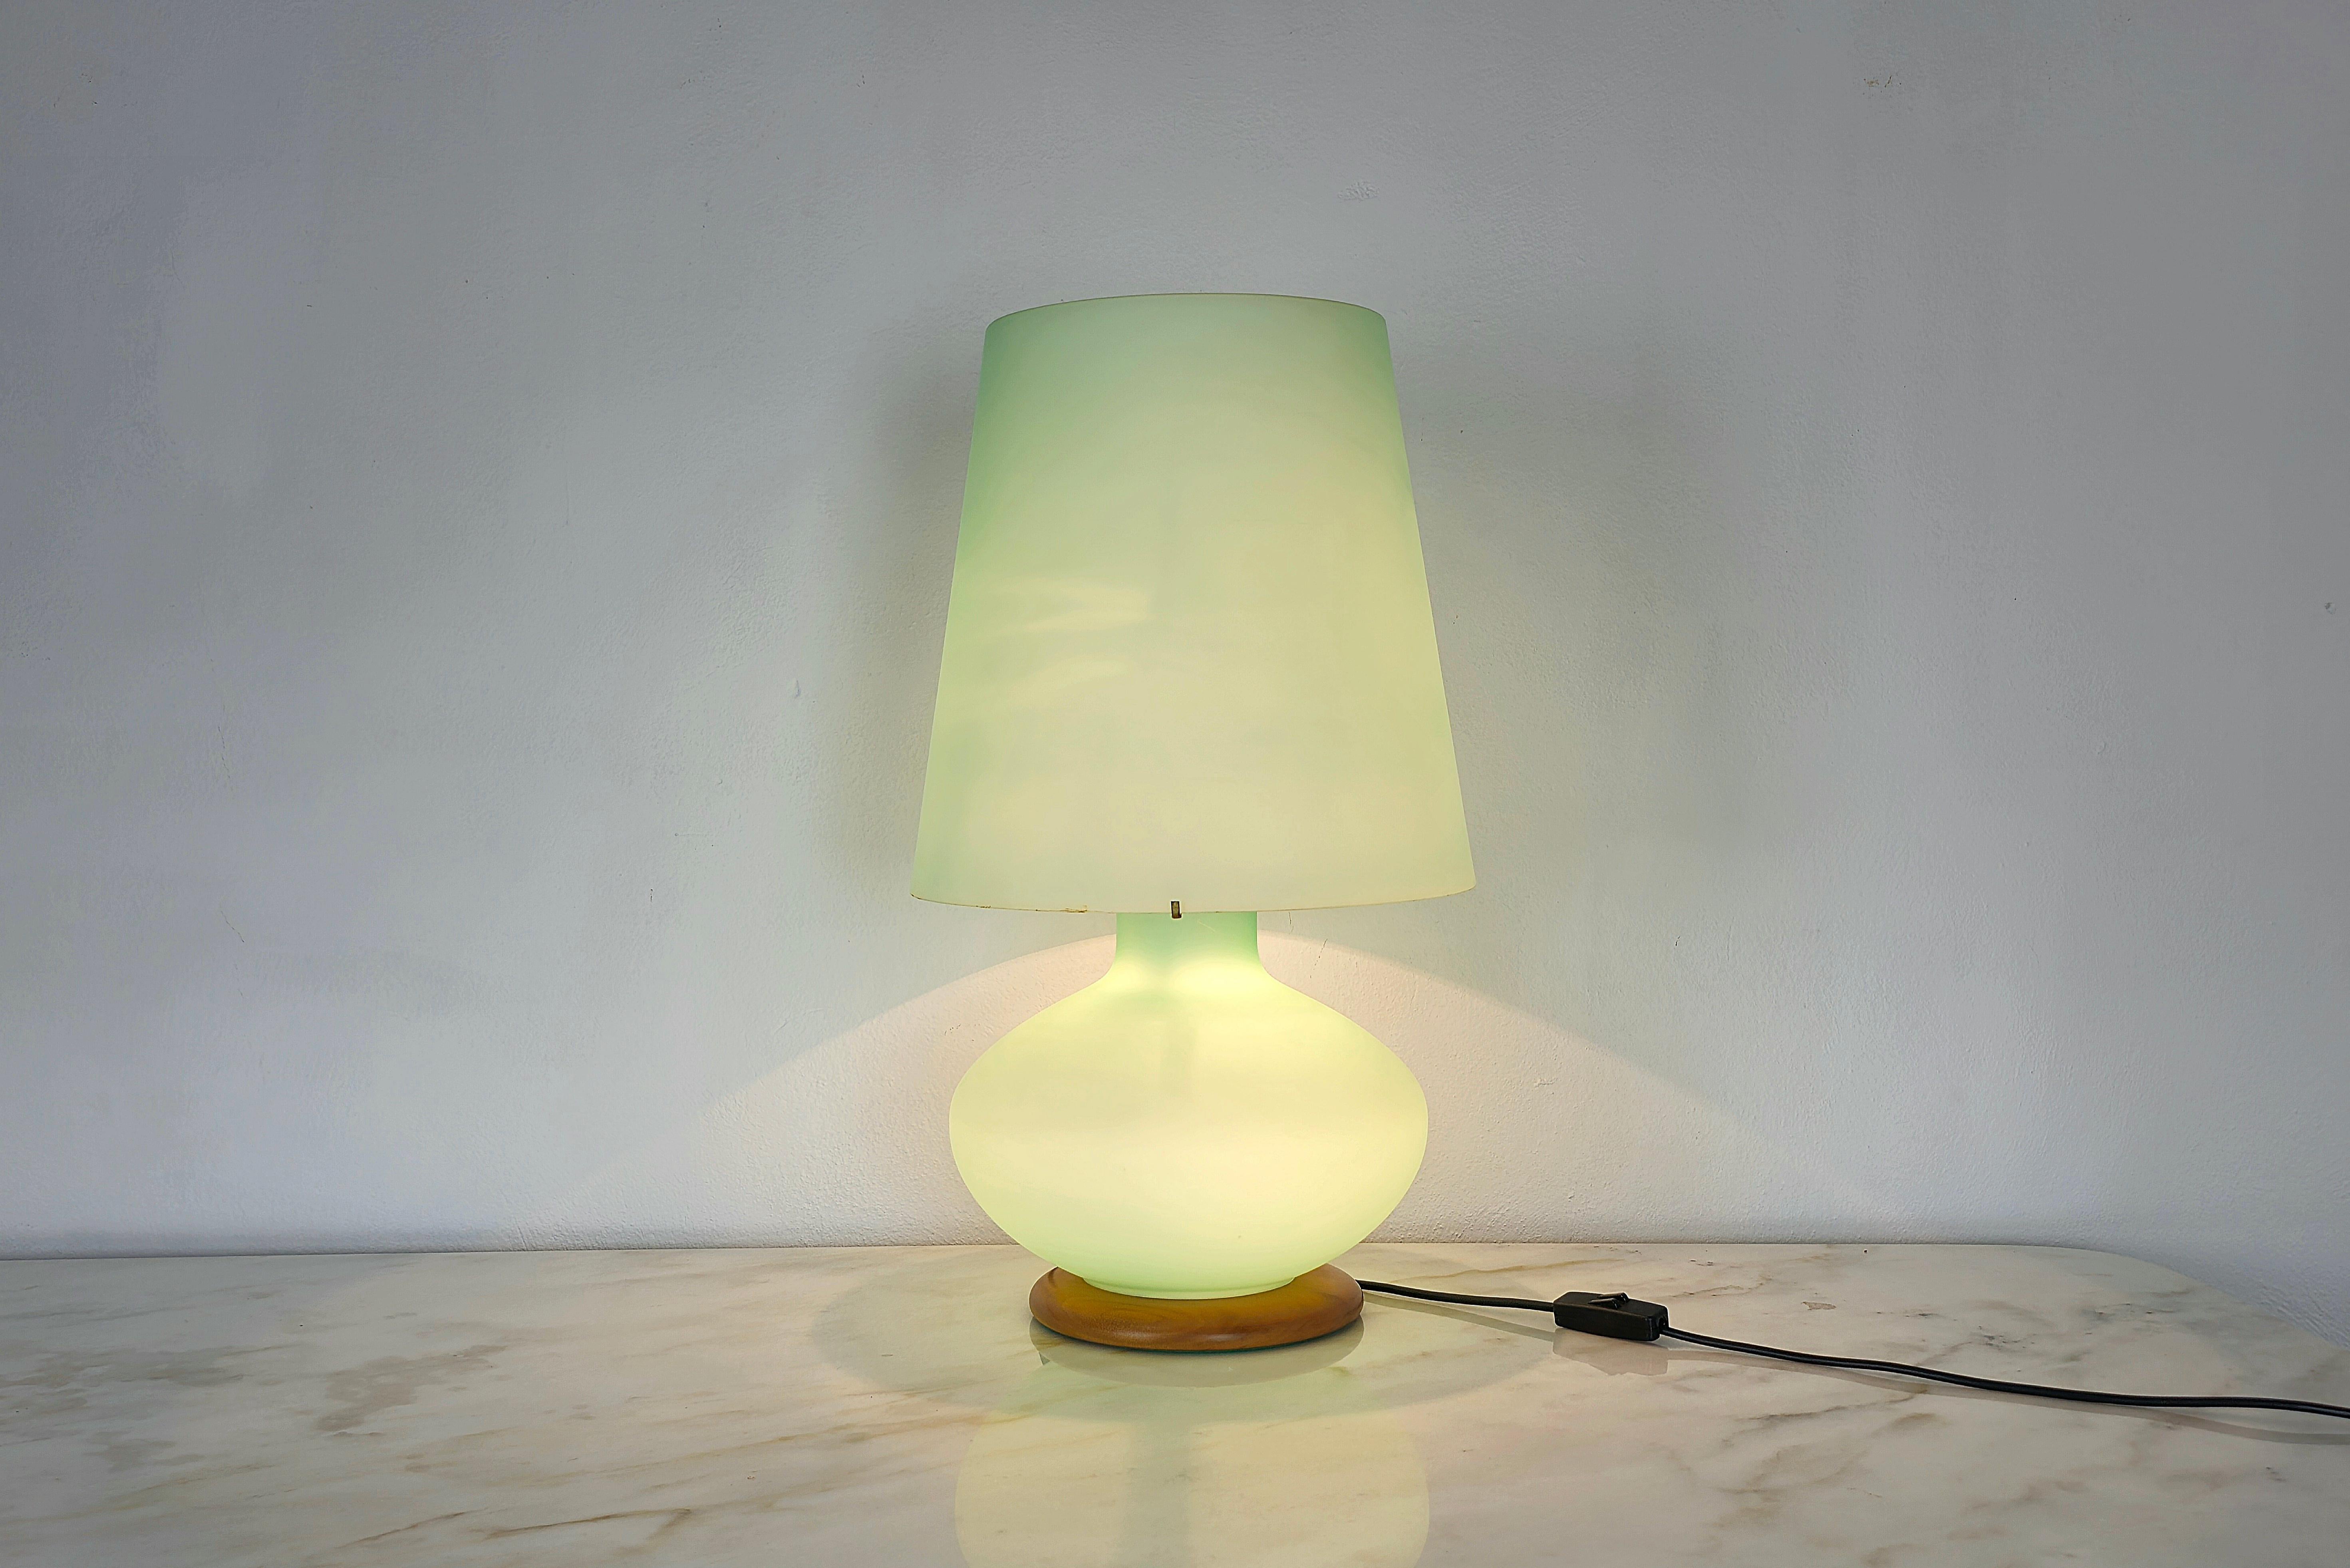 Large table lamp made of hand-worked layered Murano glass in aqua green color with a circular wooden base and metal accessories. The management of the light can be managed thanks to the switch, alternating the lights to your liking. Made in Murano